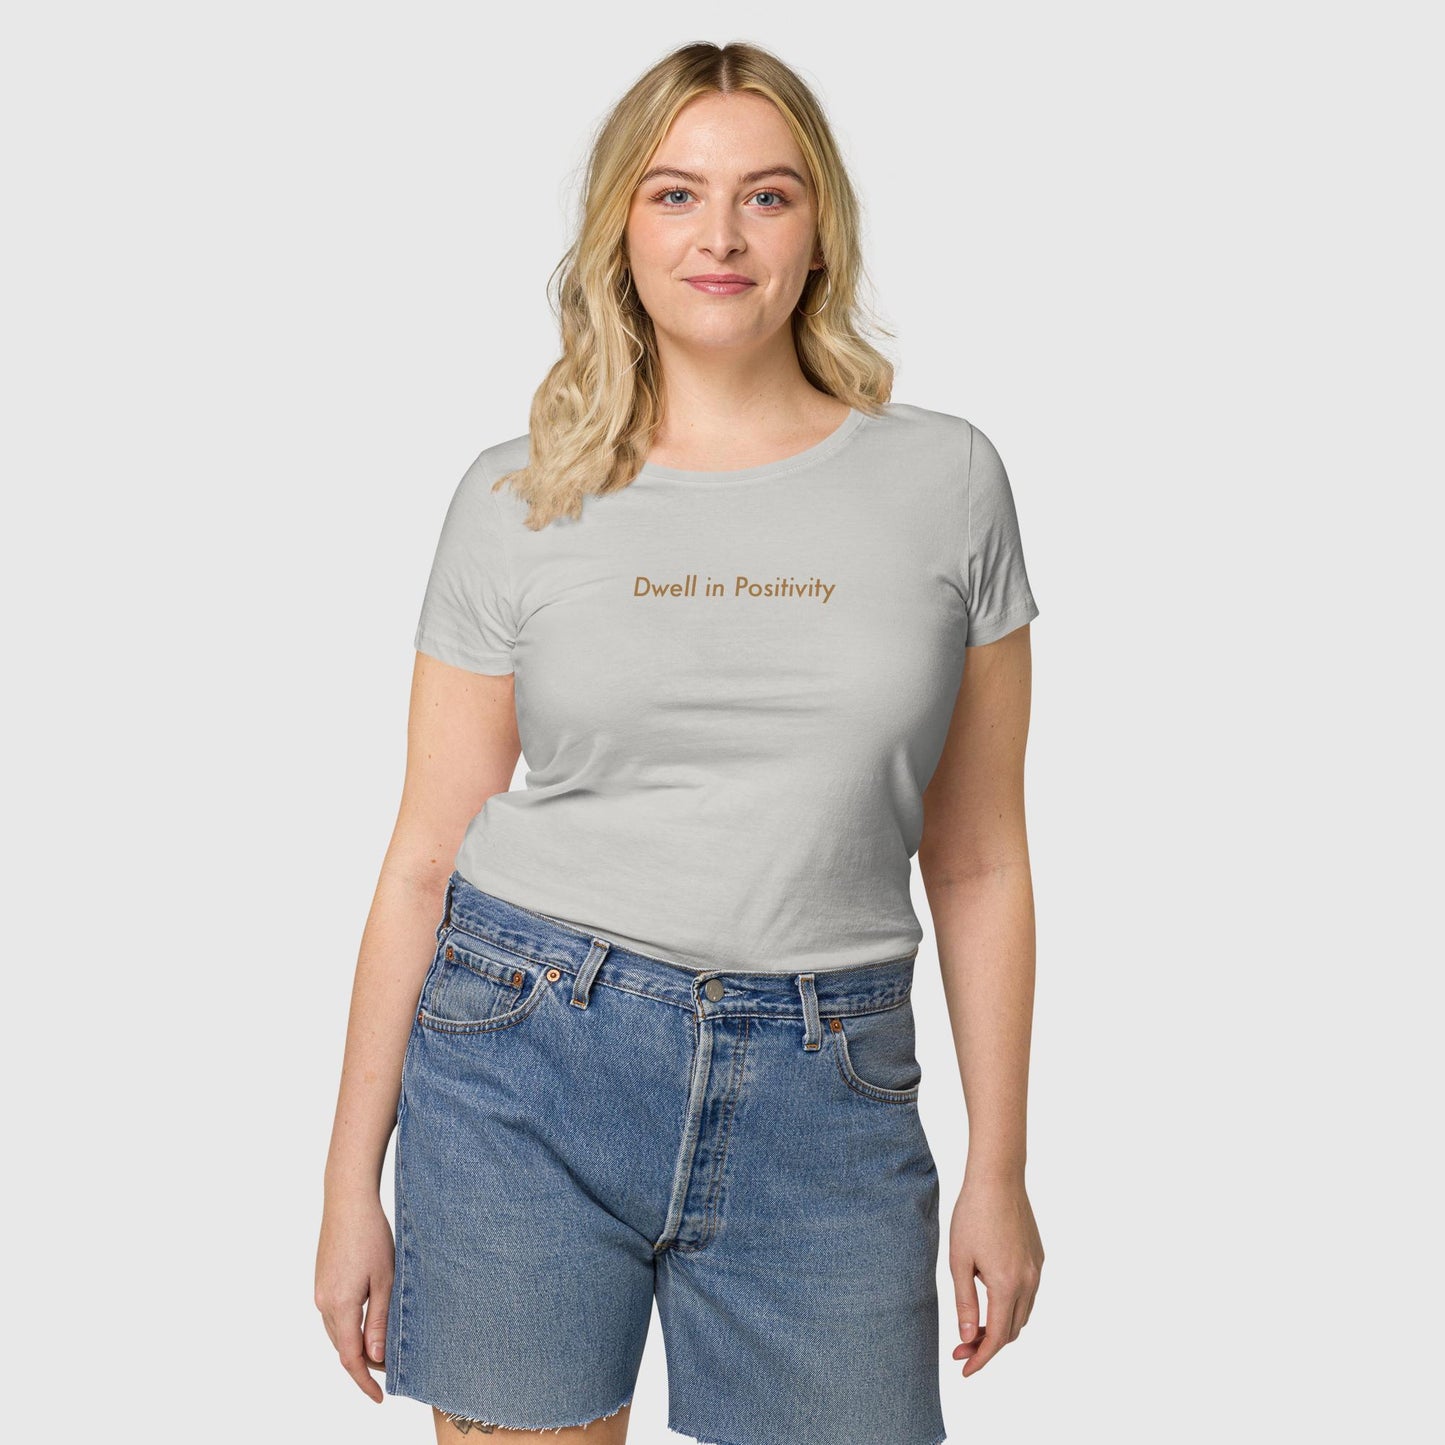 Women's pure gray organic cotton t-shirt that features Emily Dickinson's quote, "I dwell in positivity."